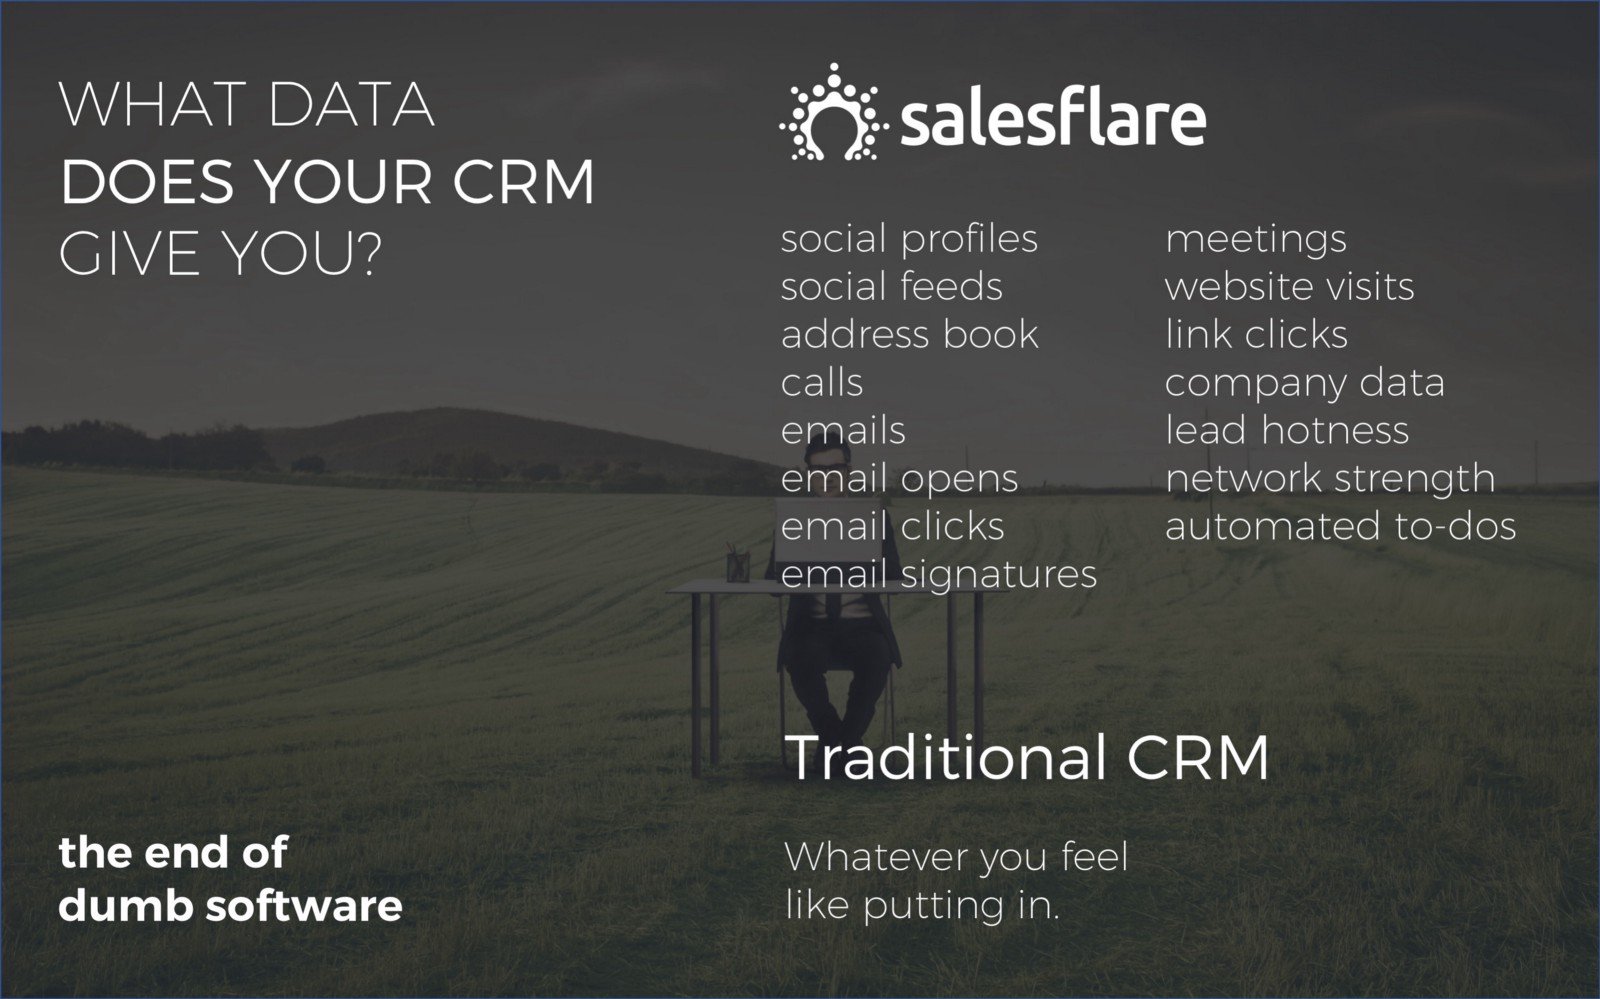 What data does your CRM give you? - Salesflare sales deck